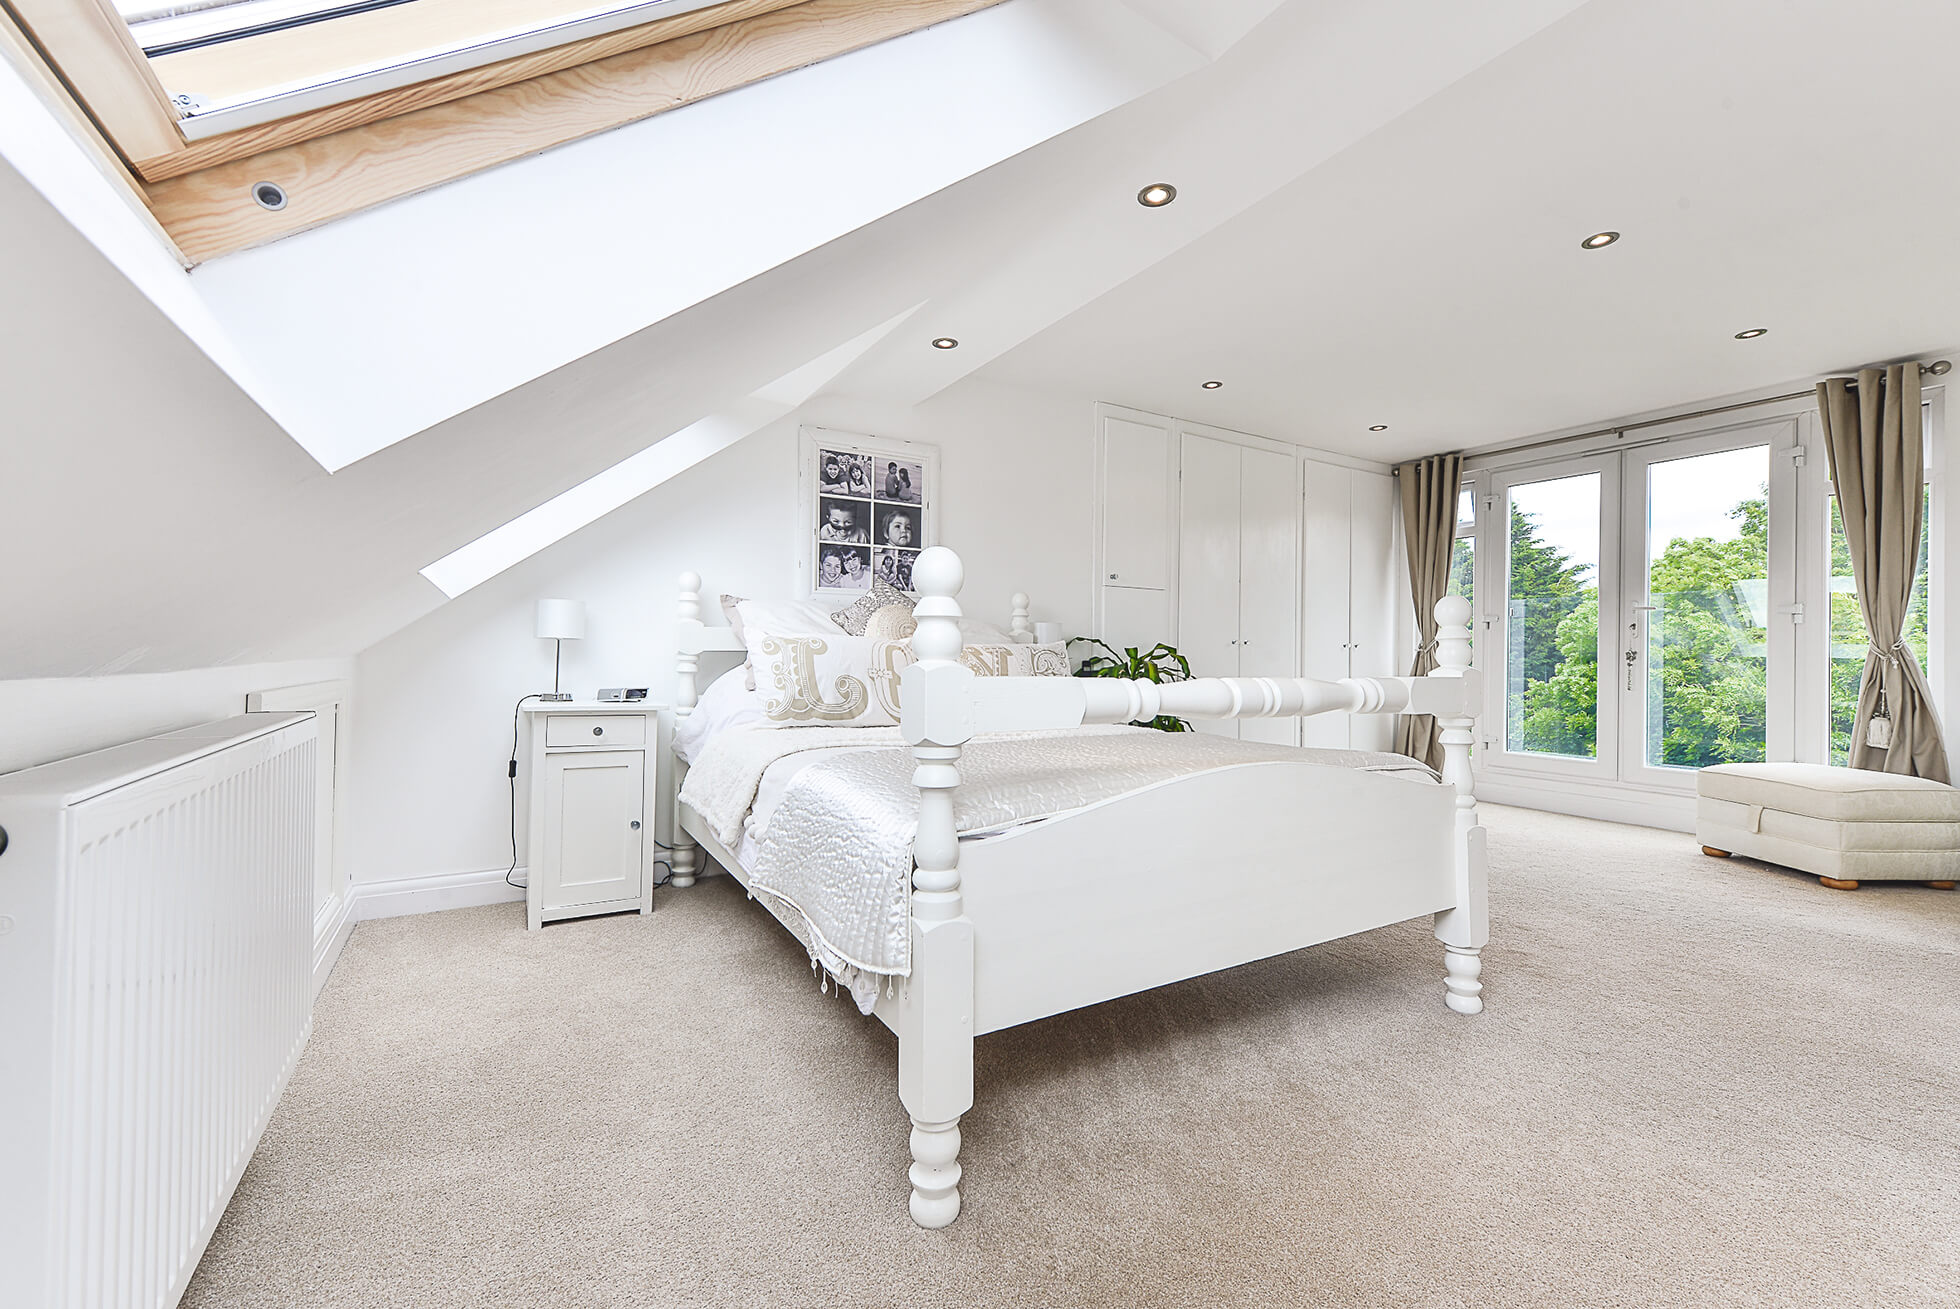 Do you have a question about converting your Loft in Caldecote? Here are the most popular questions asked by our clients.